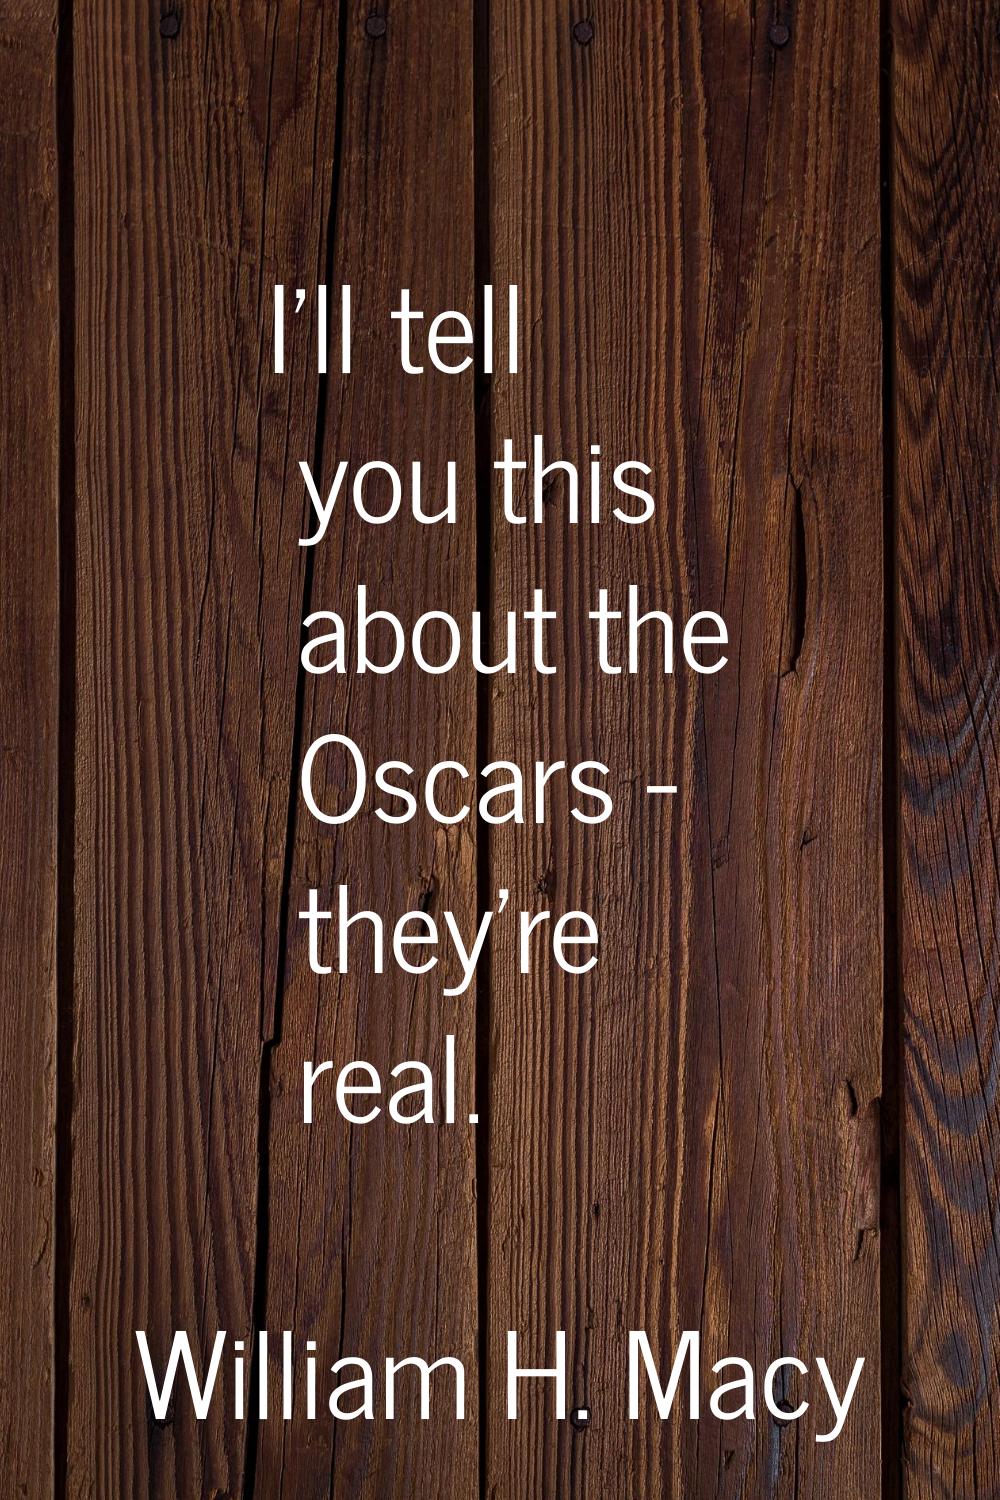 I'll tell you this about the Oscars - they're real.